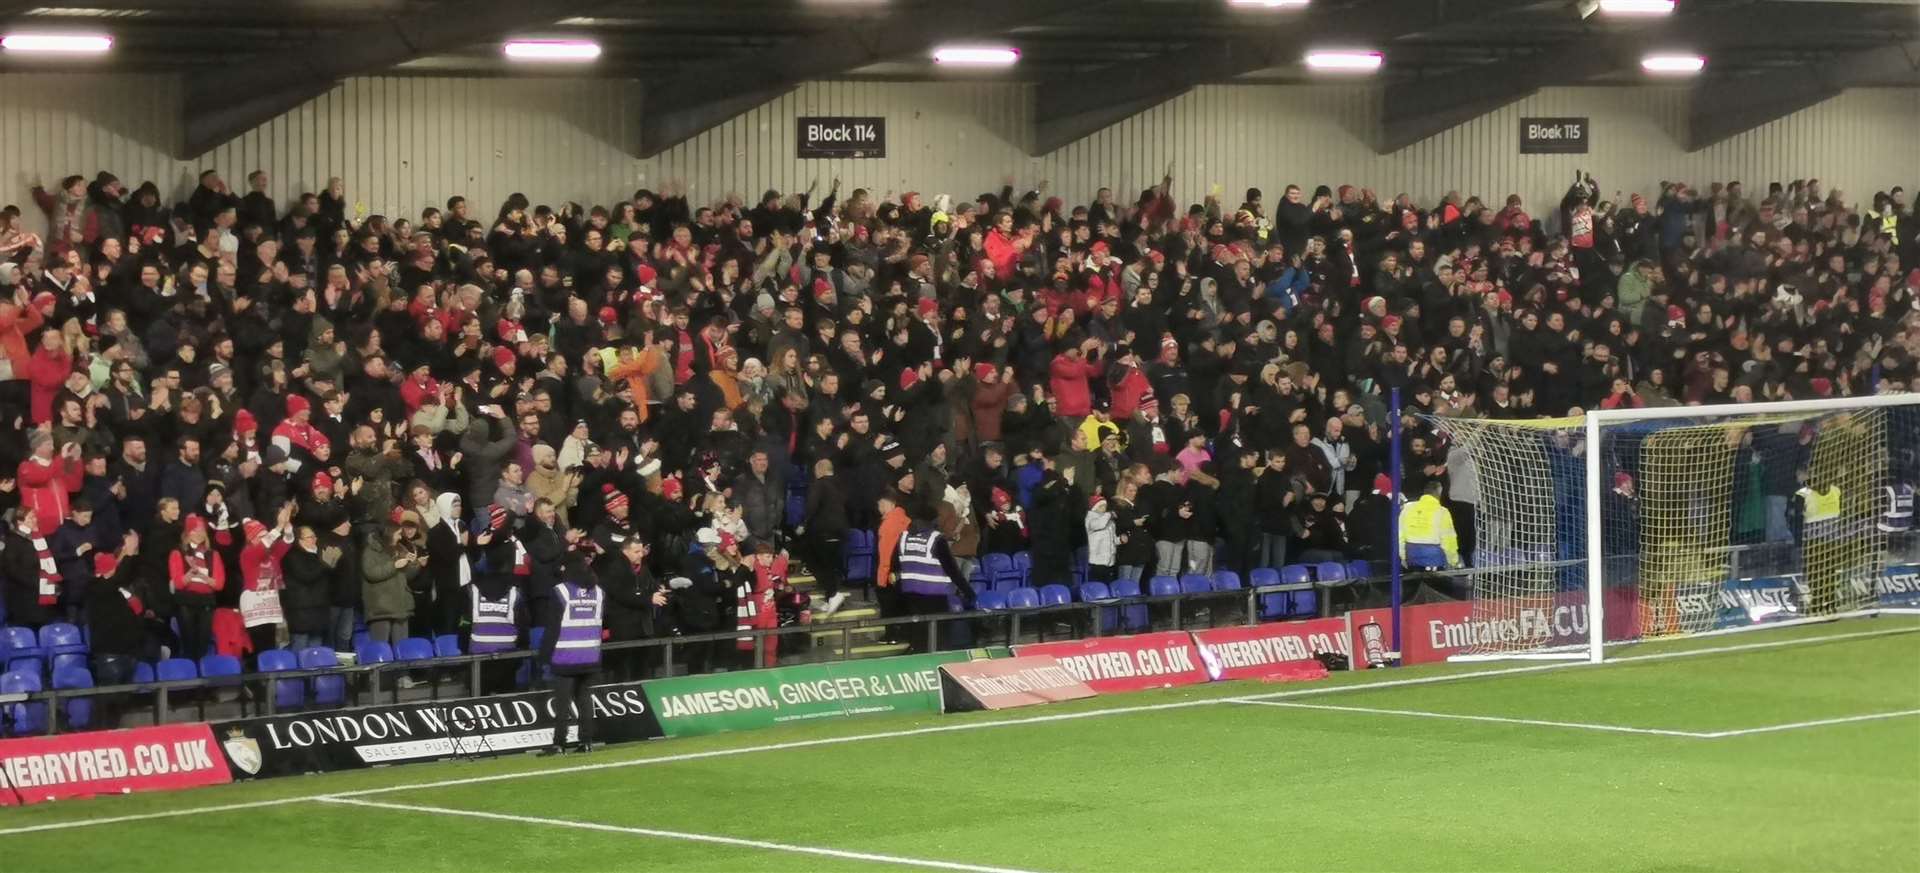 Ramsgate were cheered on by 1,400 fans at AFC Wimbledon in the FA Cup Second Round.